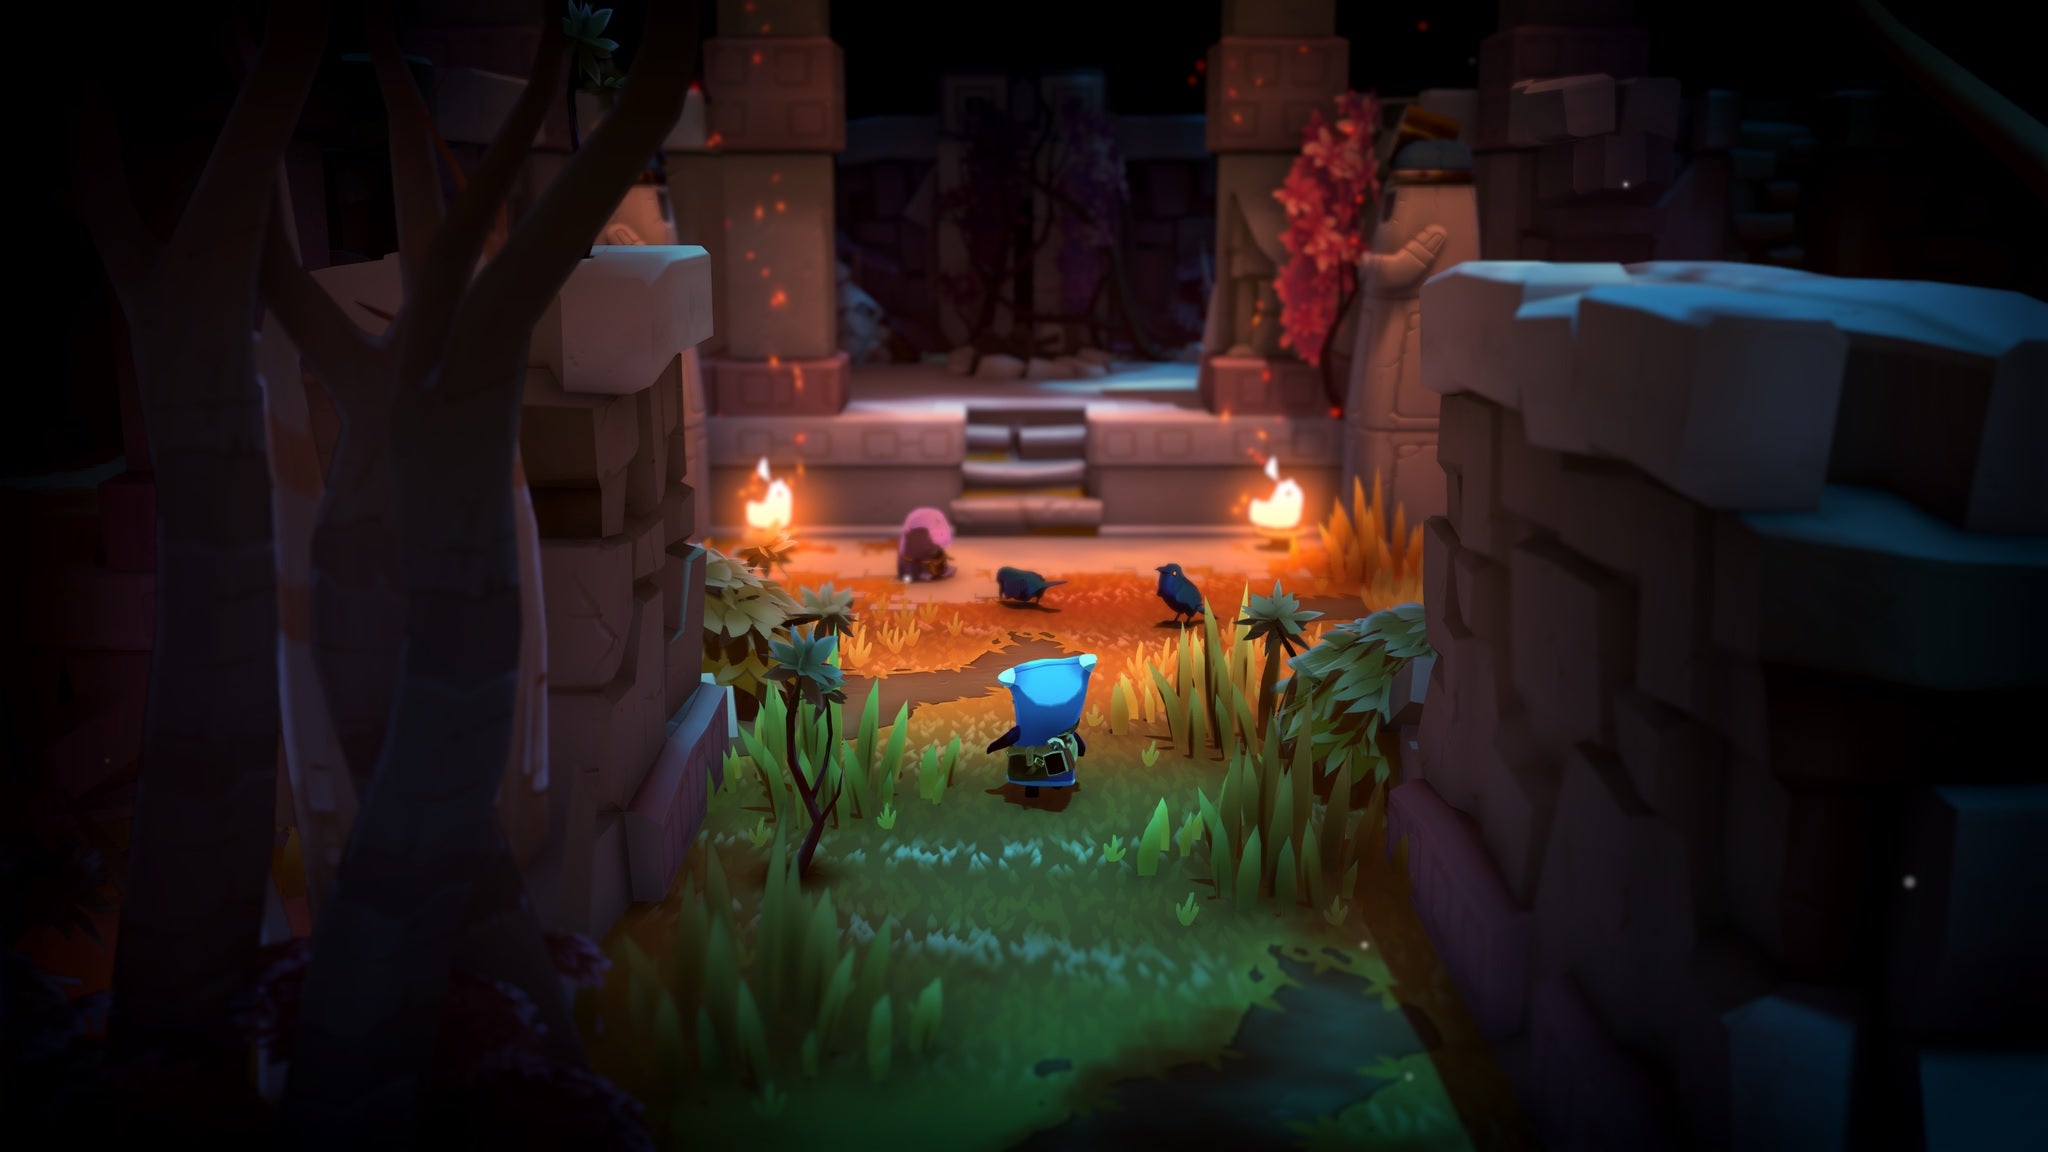 The Last Campfire - The main character Ember walks down a grassy corridor of ruins with lit torches leading to an overgrown staircase and stone door.